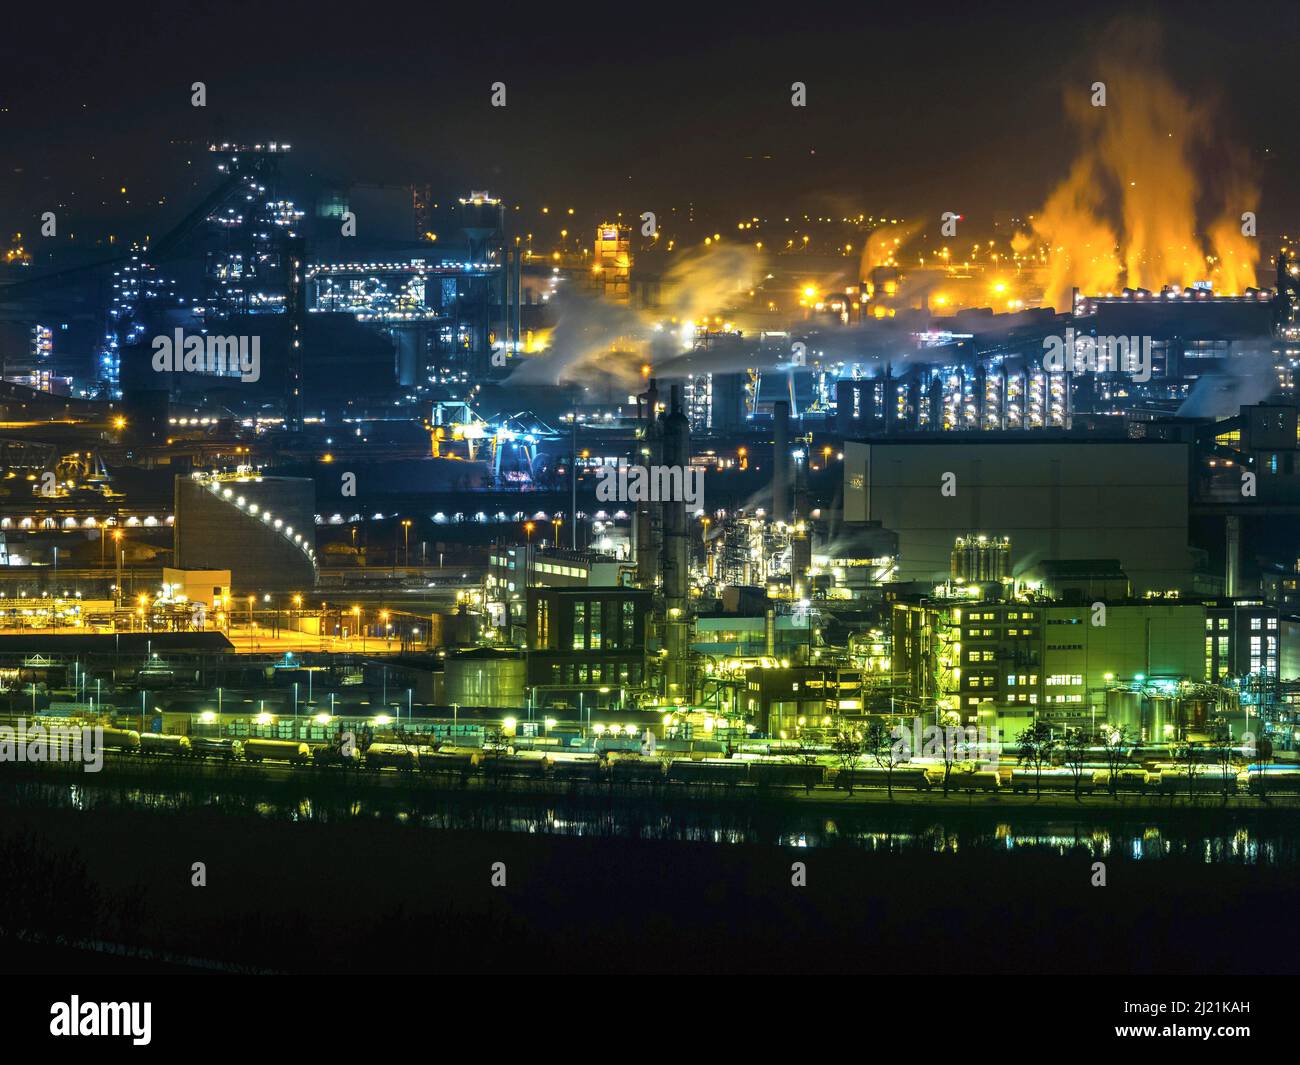 Industrial area Linz, Voest and chemical plant at night, Austria, Linz Stock Photo